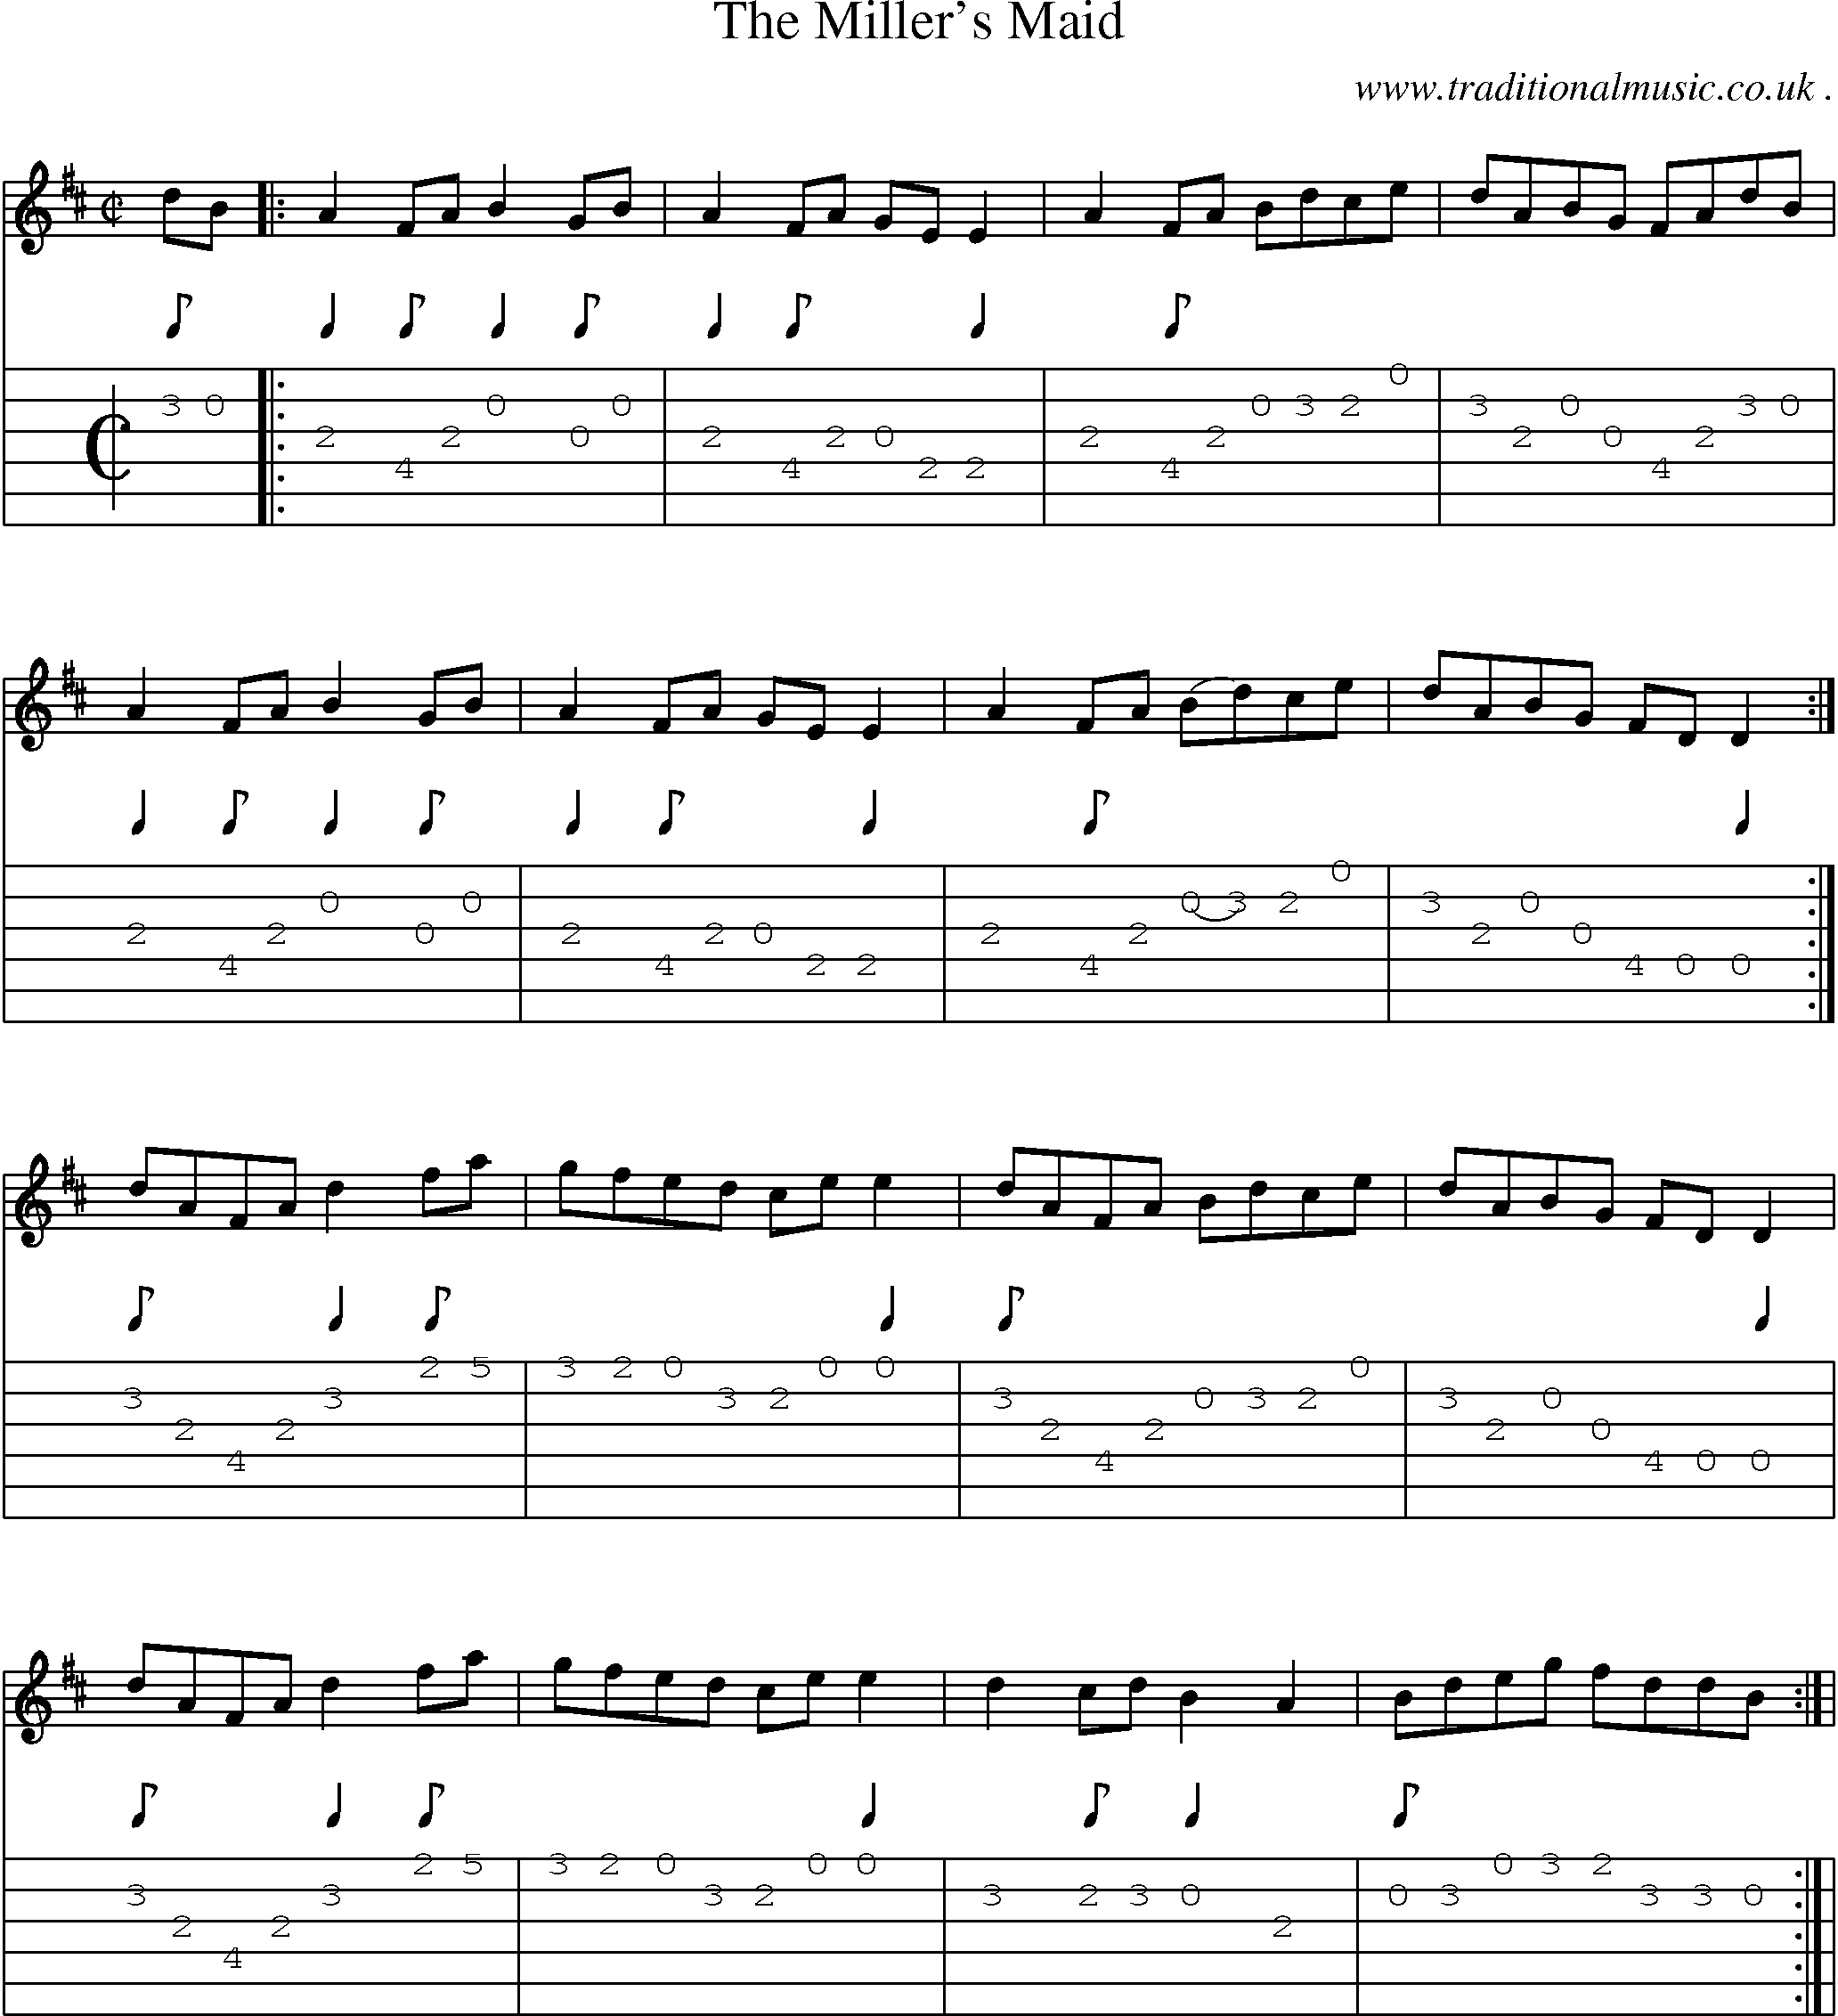 Sheet-Music and Guitar Tabs for The Millers Maid